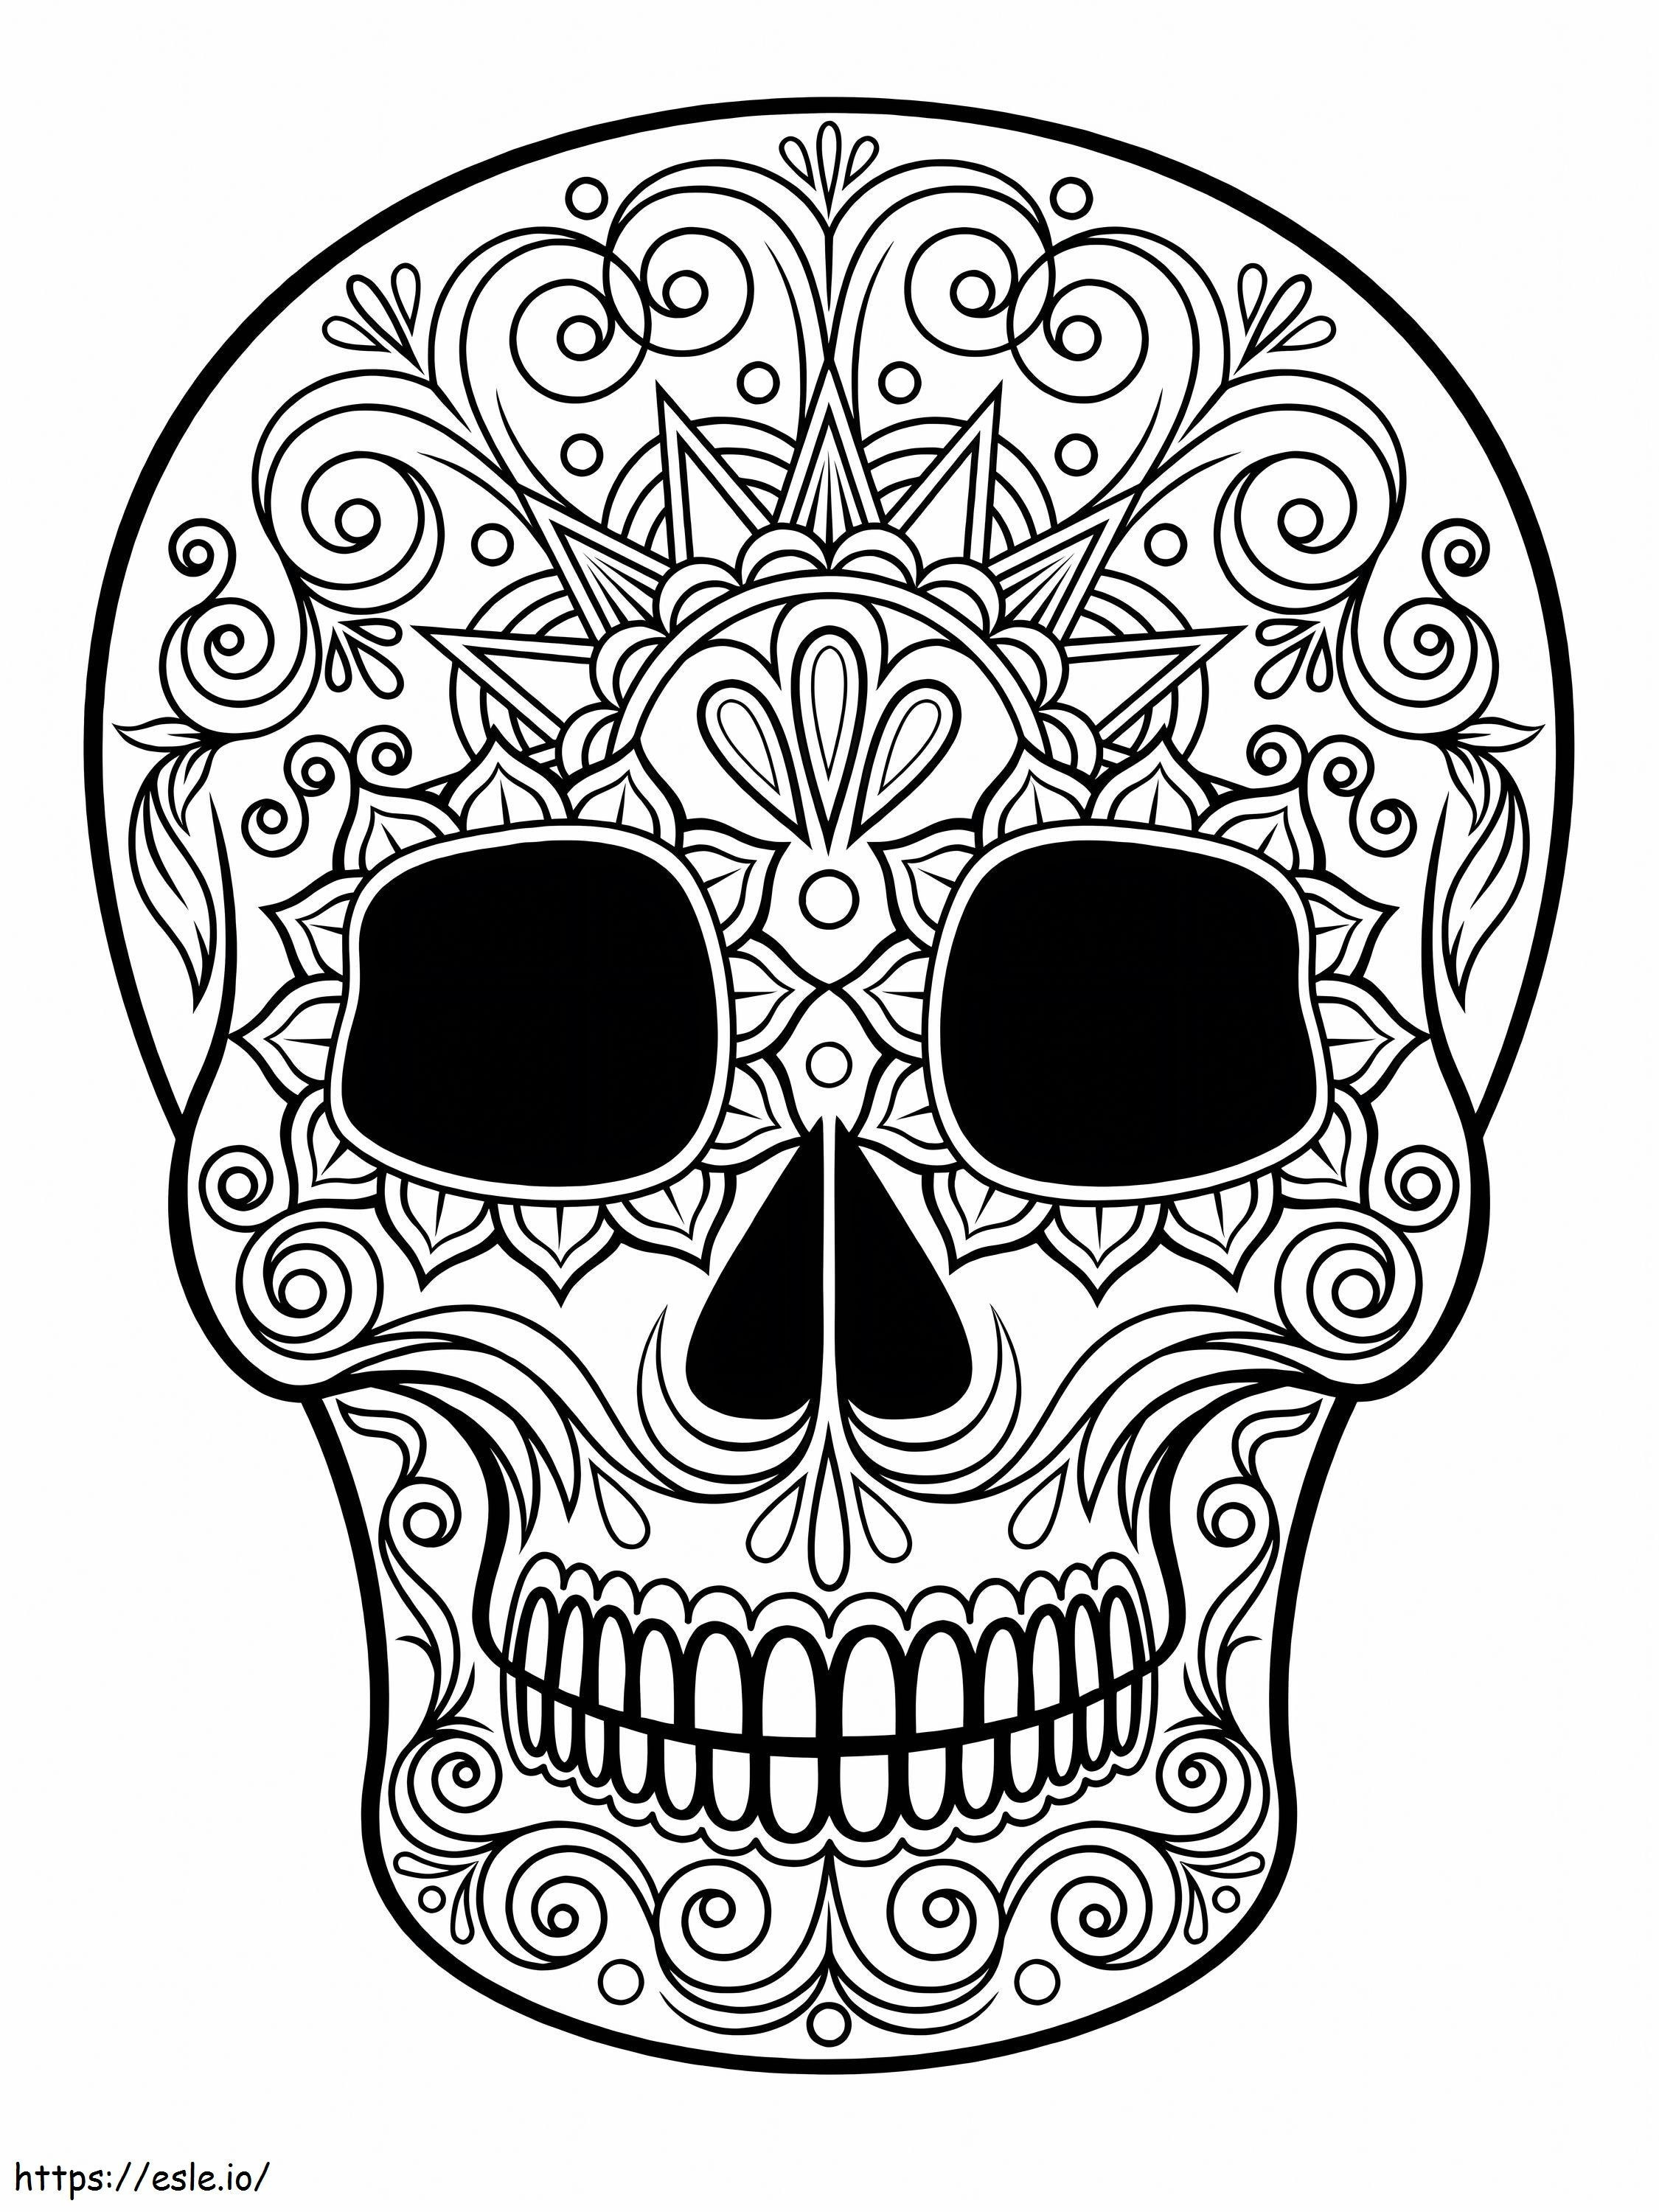 The Skull Is For Adults coloring page